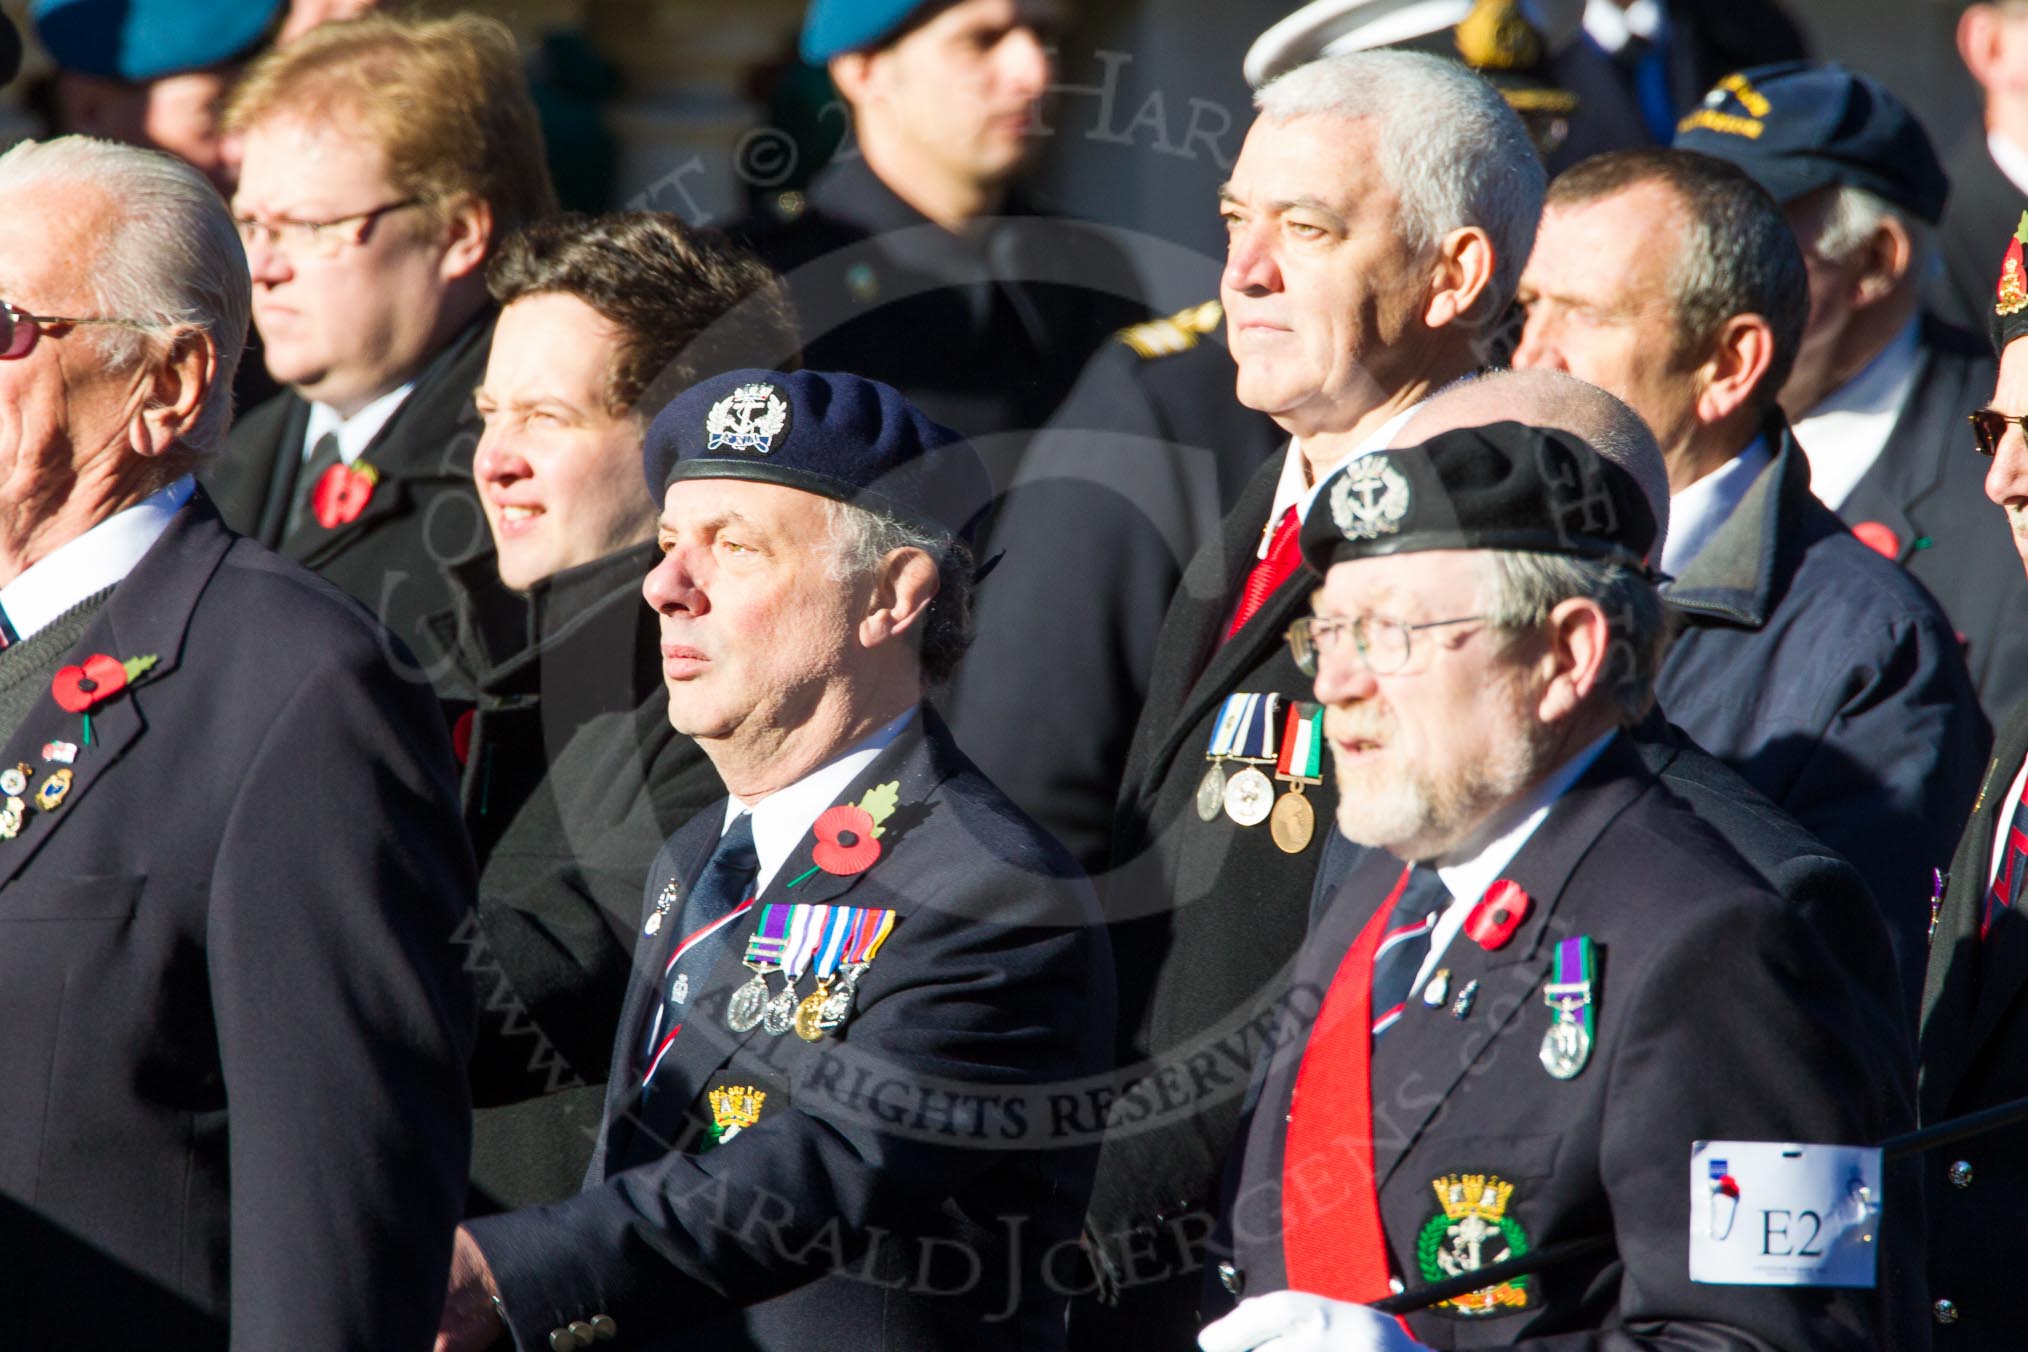 Remembrance Sunday Cenotaph March Past 2013: E2 - Royal Naval Association..
Press stand opposite the Foreign Office building, Whitehall, London SW1,
London,
Greater London,
United Kingdom,
on 10 November 2013 at 11:44, image #364